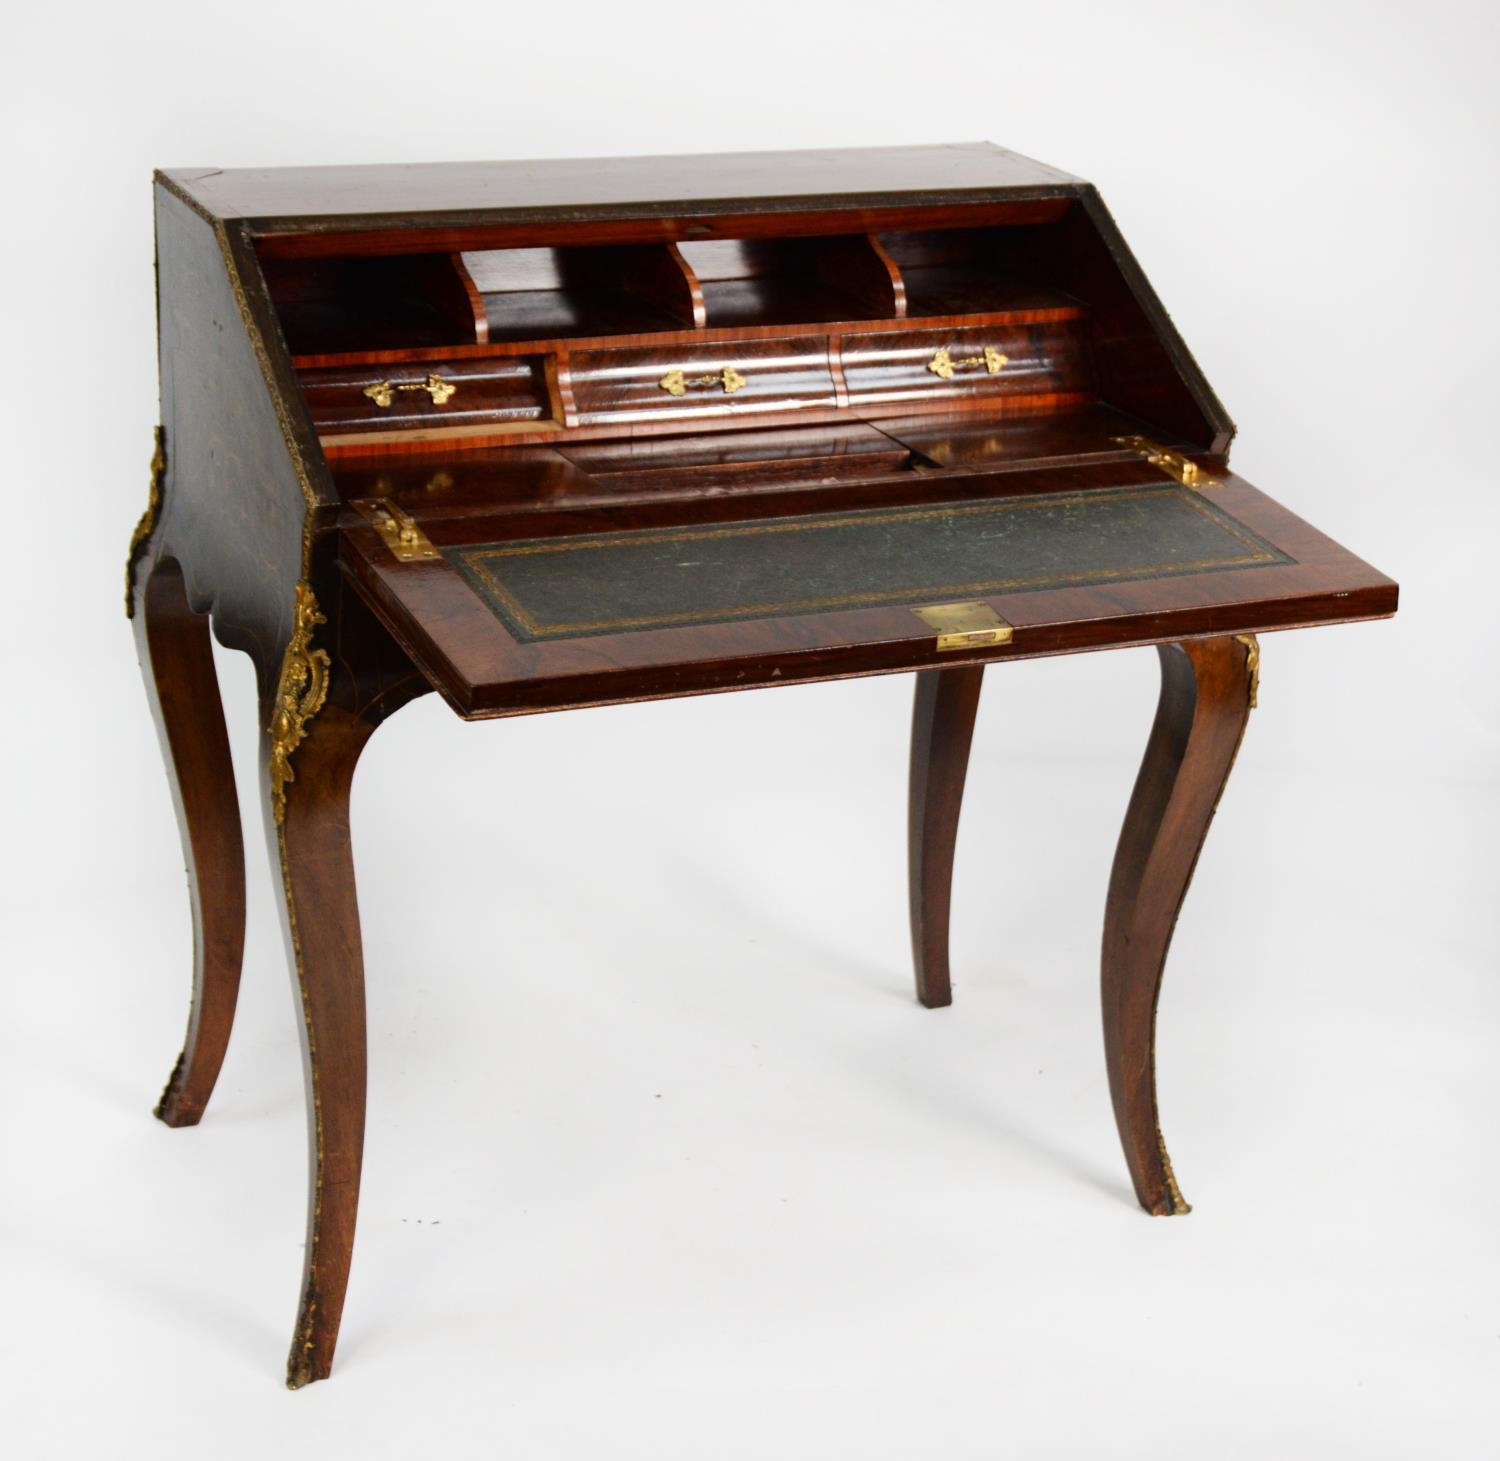 LATE NINETEENTH CENTURY GILT METAL MOUNTED AND INLAID KINGWOOD BUREAU DE DAME, of typical for the - Image 3 of 6